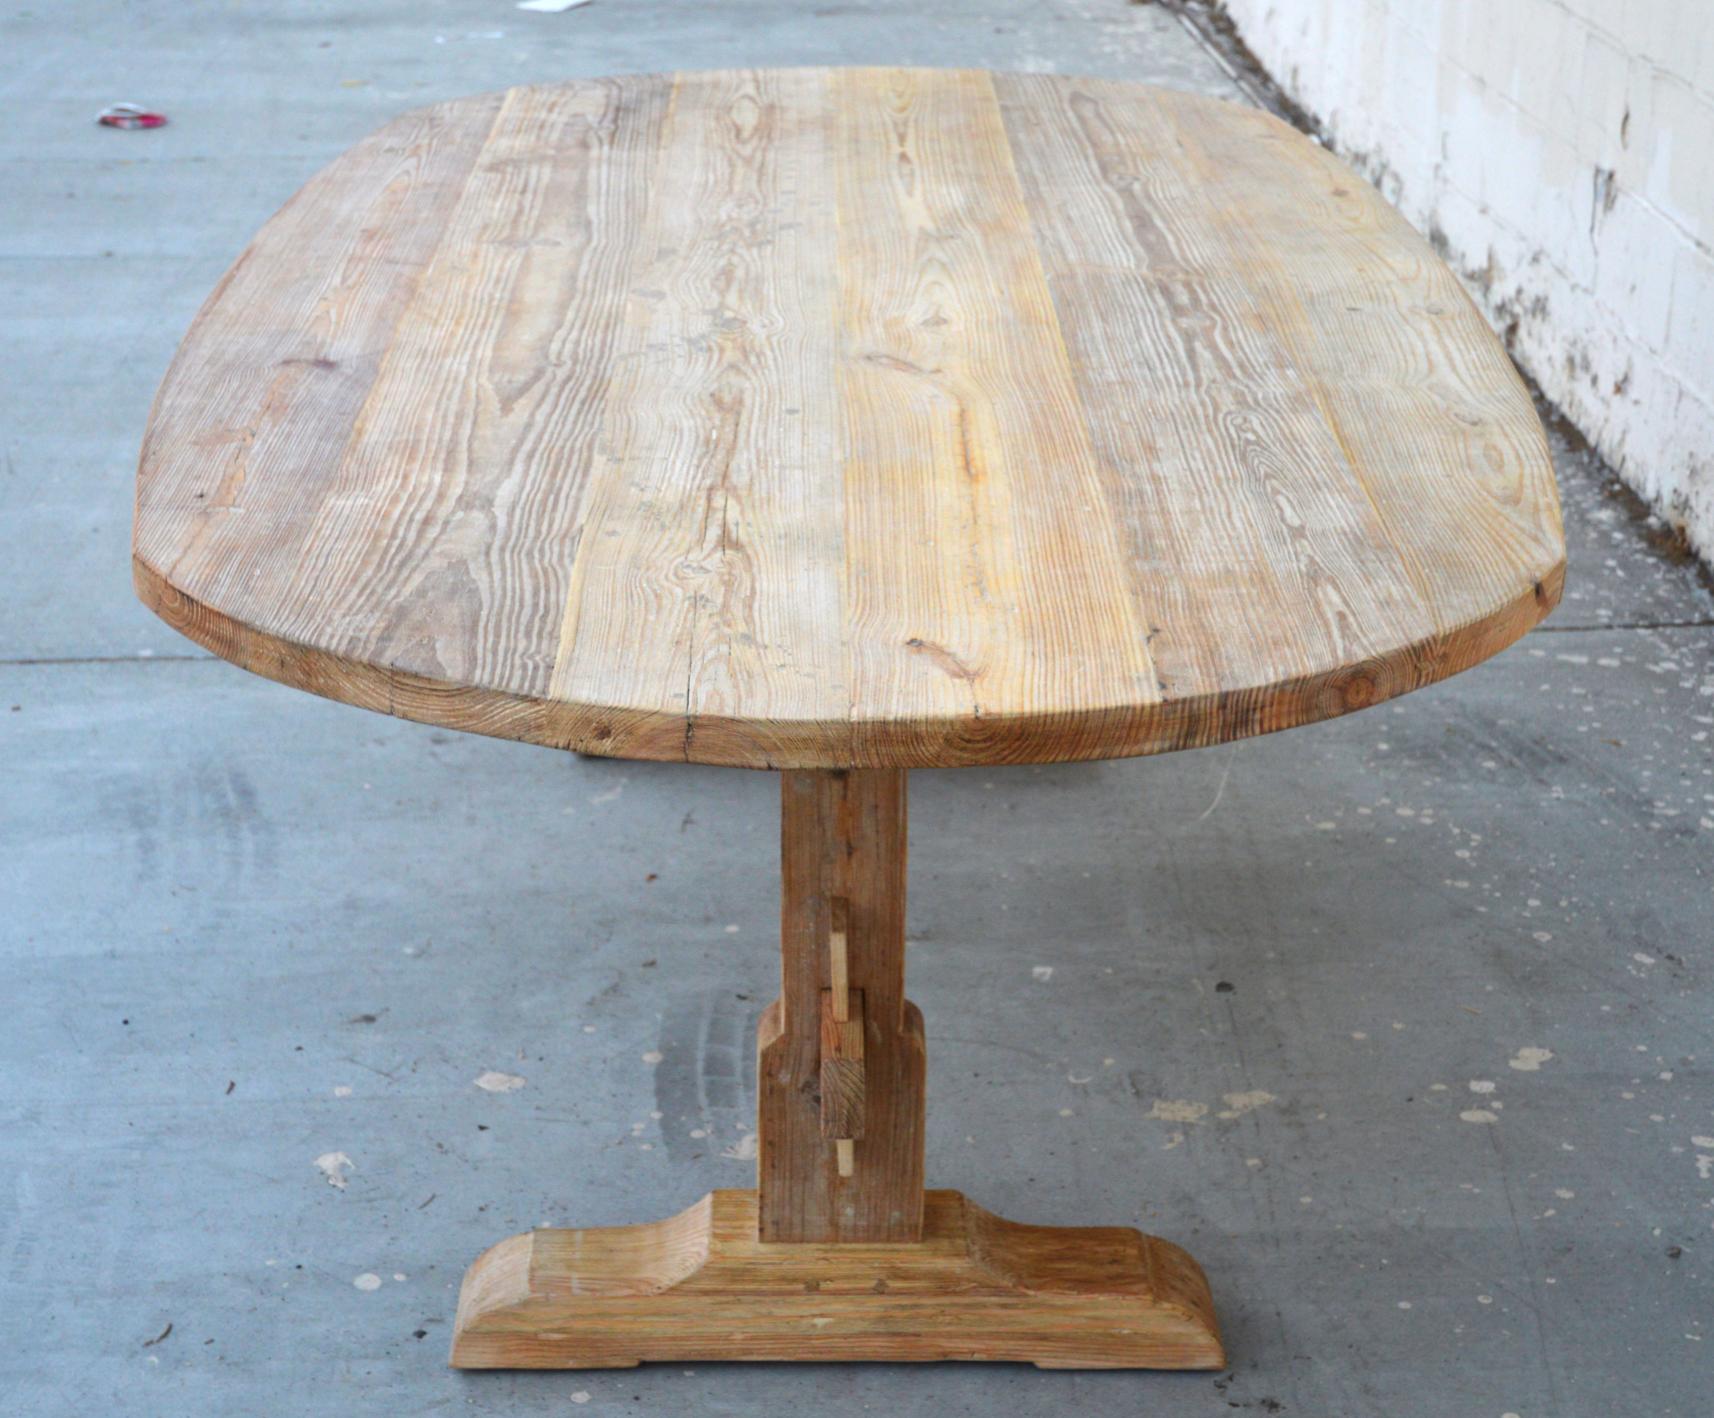 Hand-Crafted Evy Trestle Table Made from Reclaimed Pine (custom) For Sale